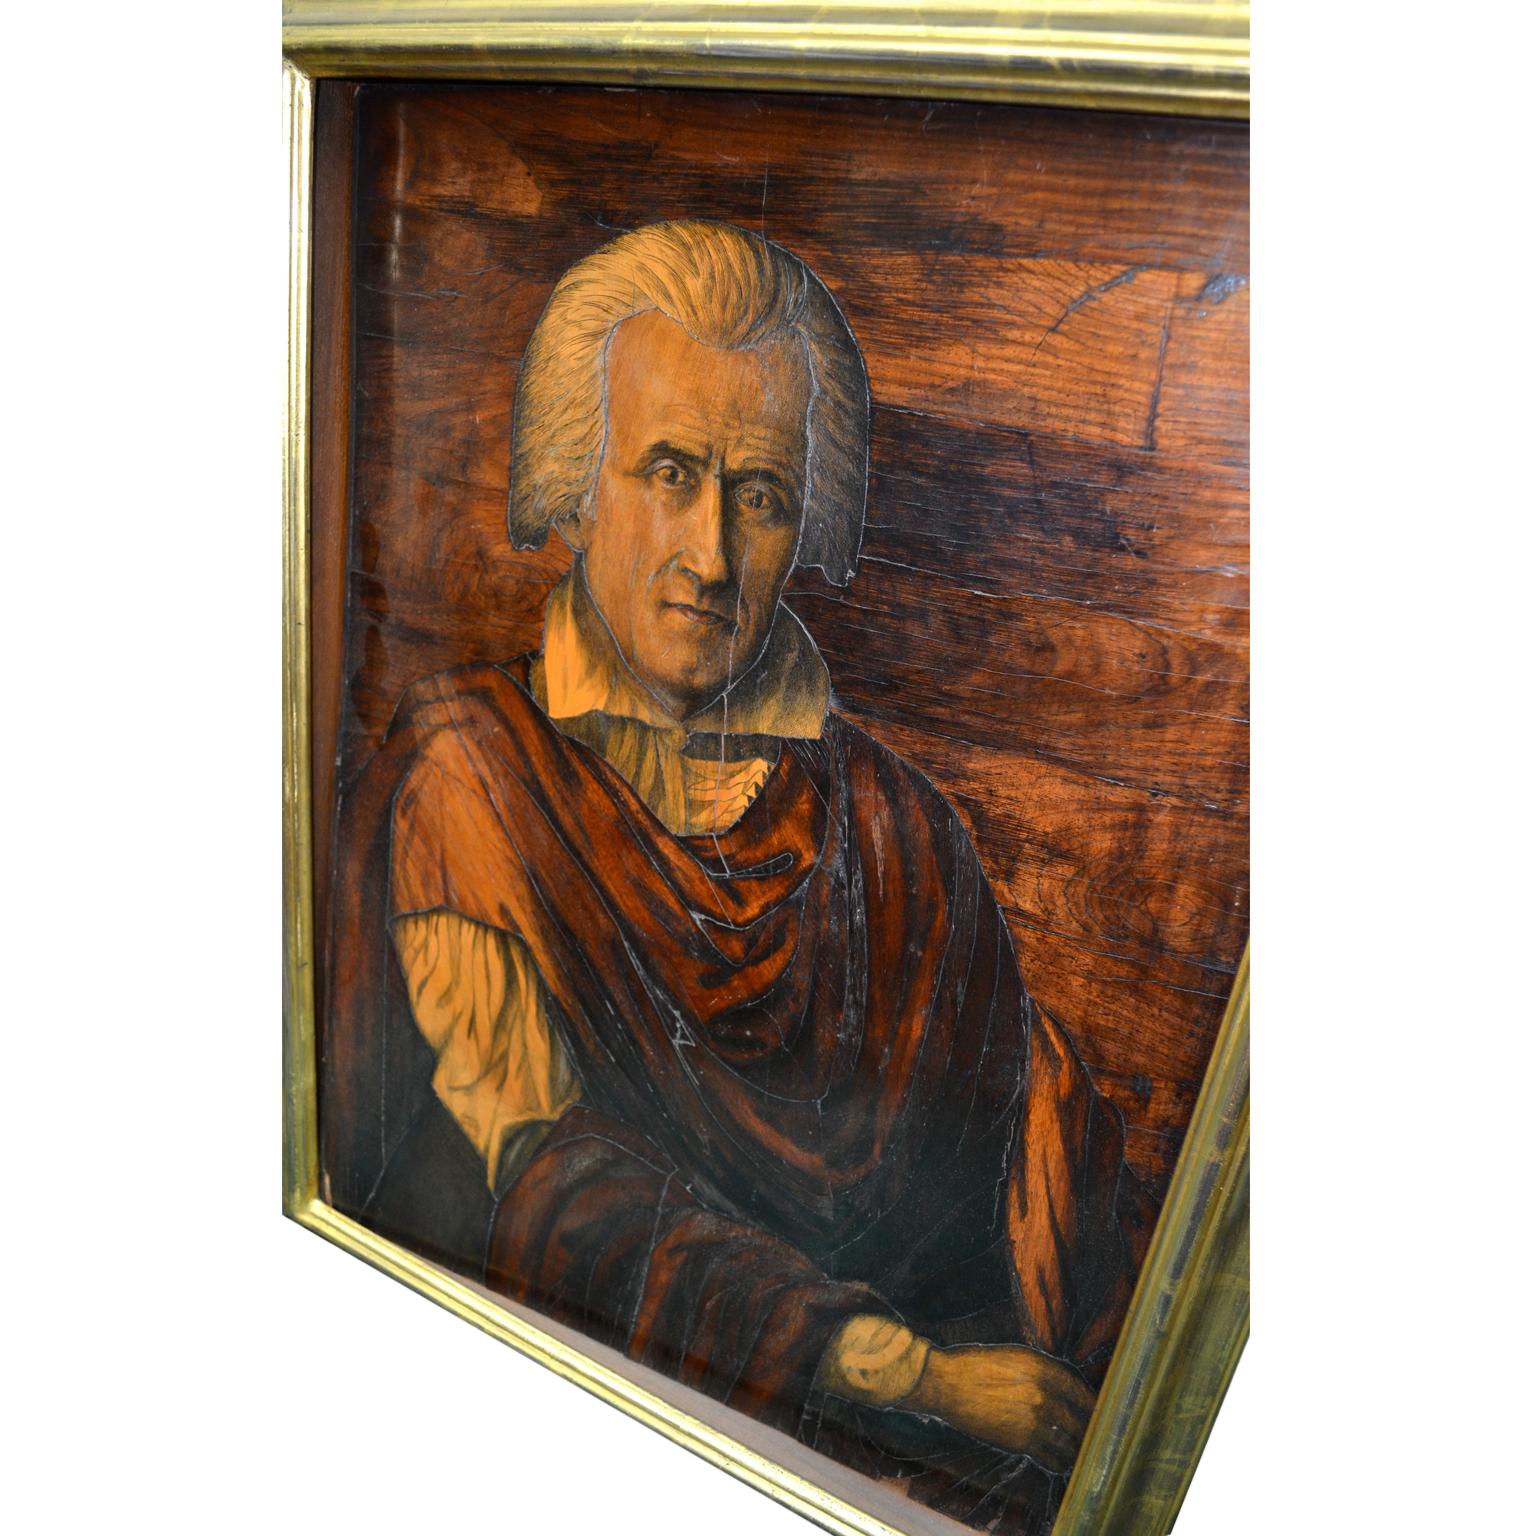 An 18th century portrait panel of possibly Christopher Columbus (or a classical philosopher) made from various types and treatments of inlaid woods, in a giltwood frame.

 